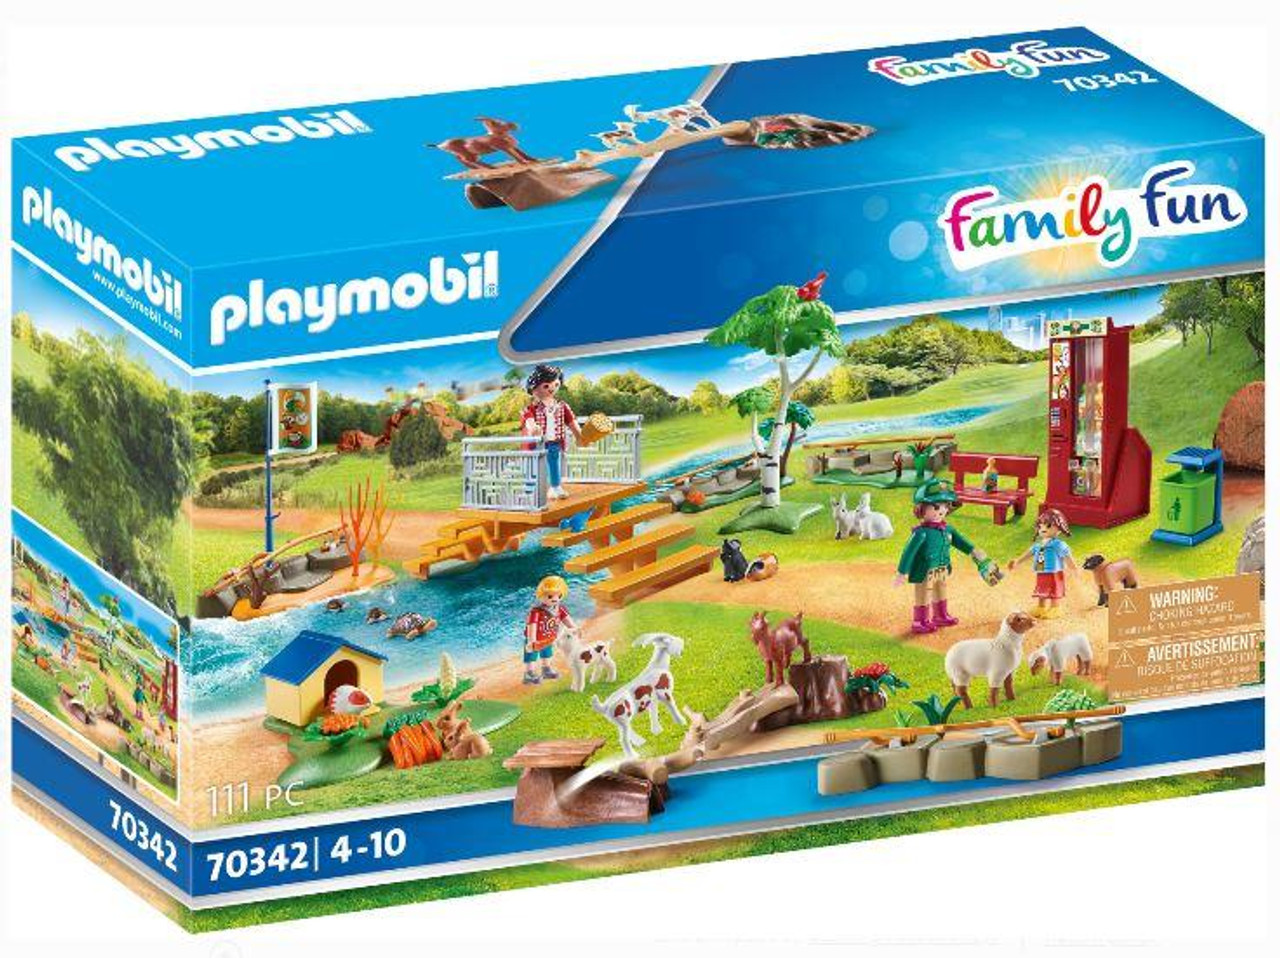 Playmobil Animals Zoo Build and Play Fun Animal Toys For Kids